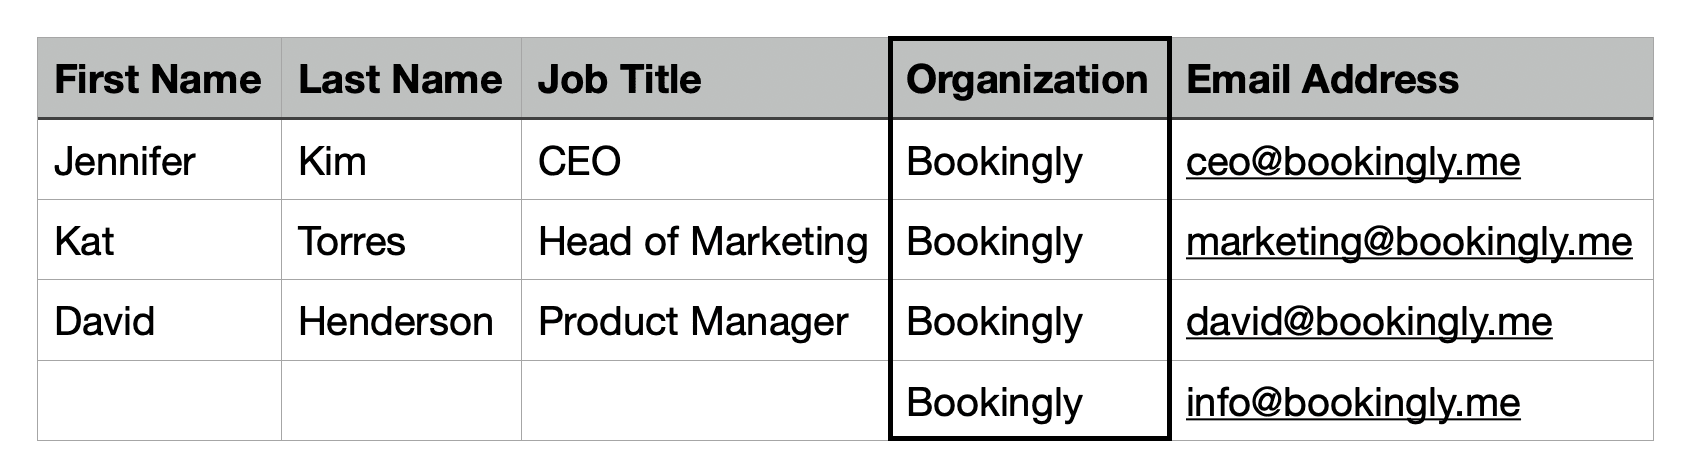 example of csv spreadsheet containing people, organization column highlighted